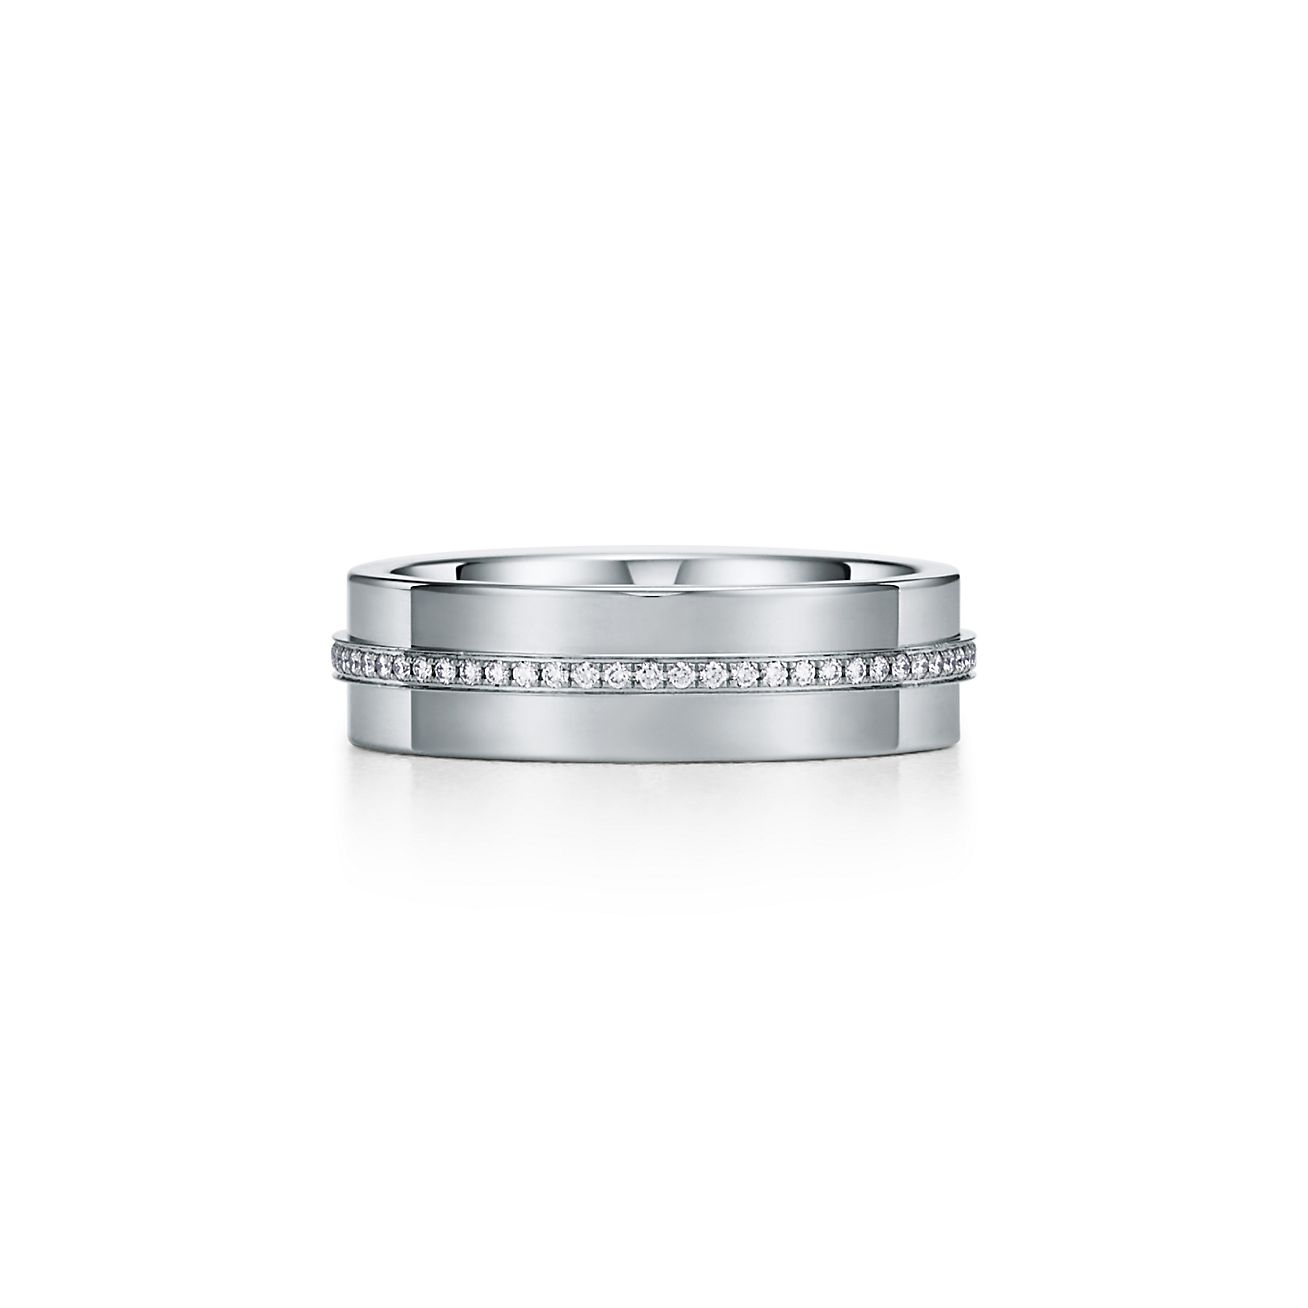 Tiffany T wide diamond ring in 18k white gold, 5.5 mm wide 